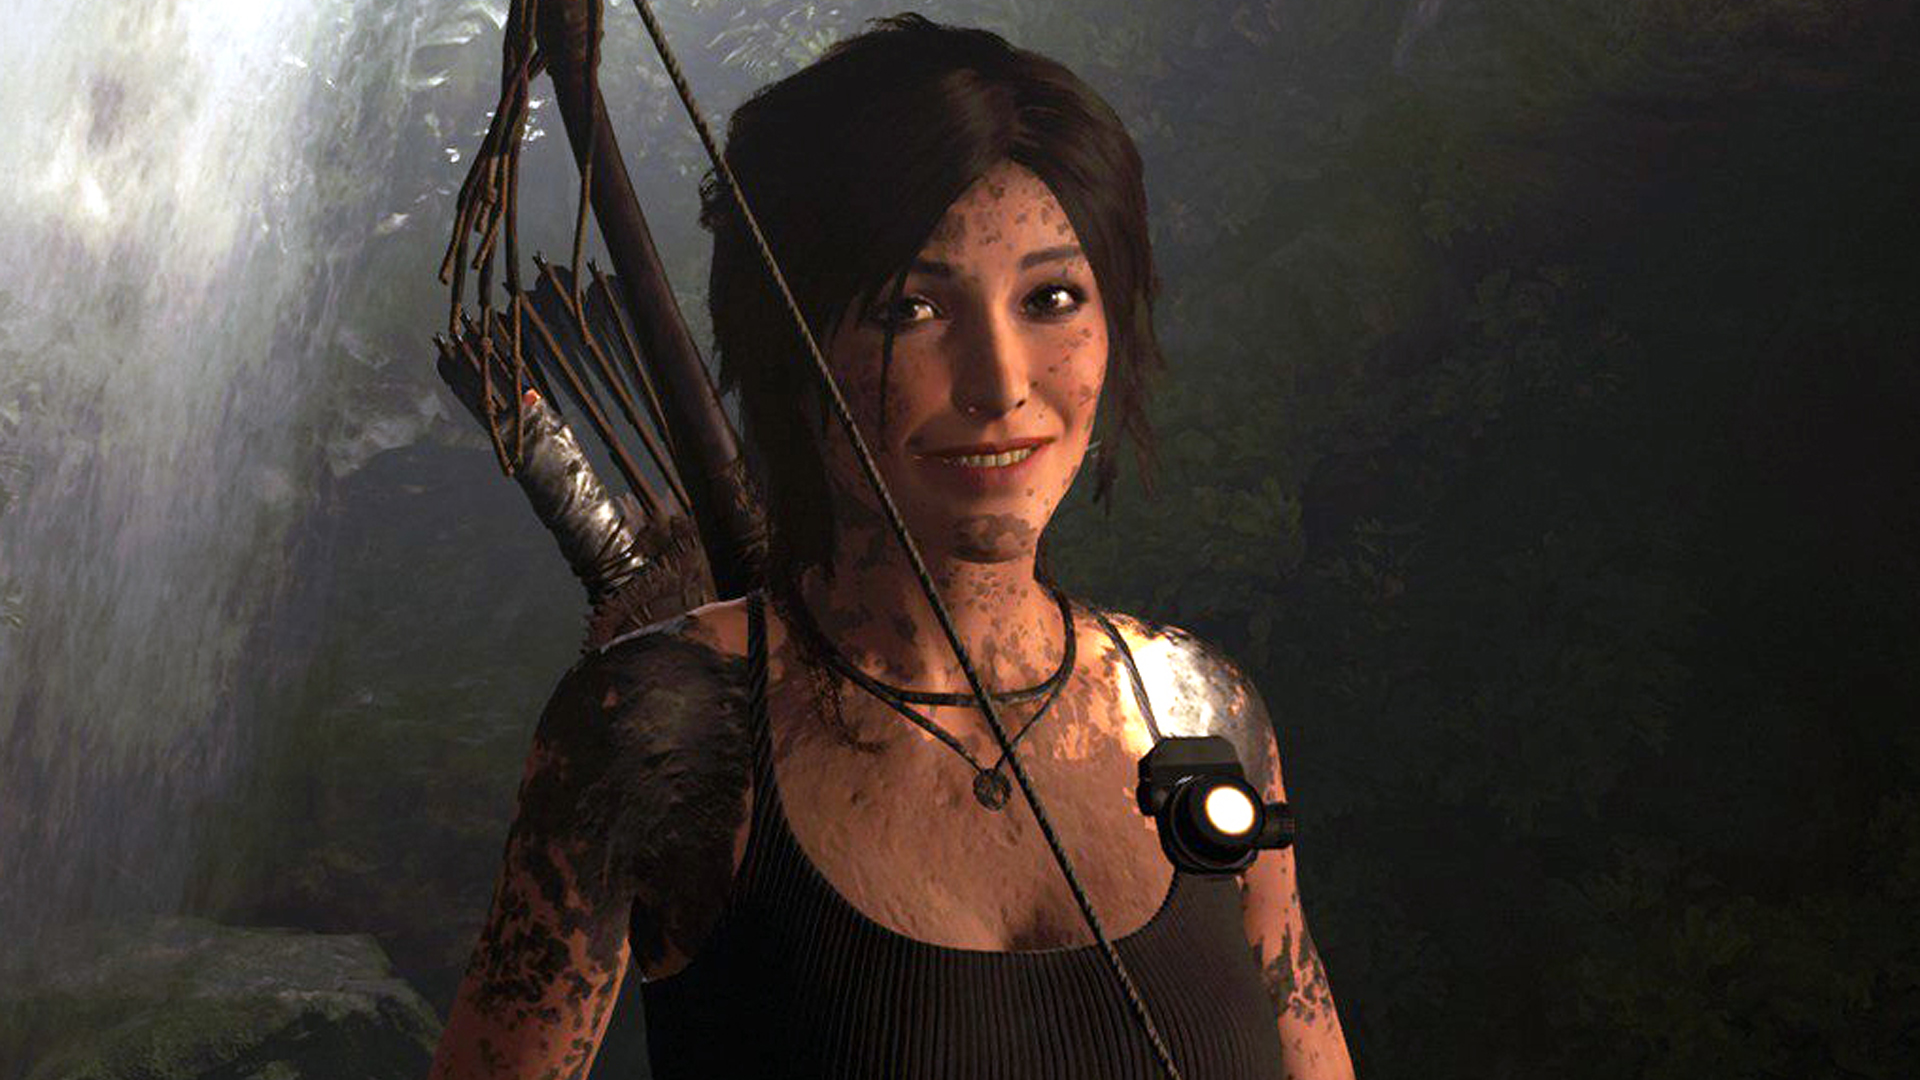 Today's free Epic game may be the entire Tomb Raider trilogy, gasp